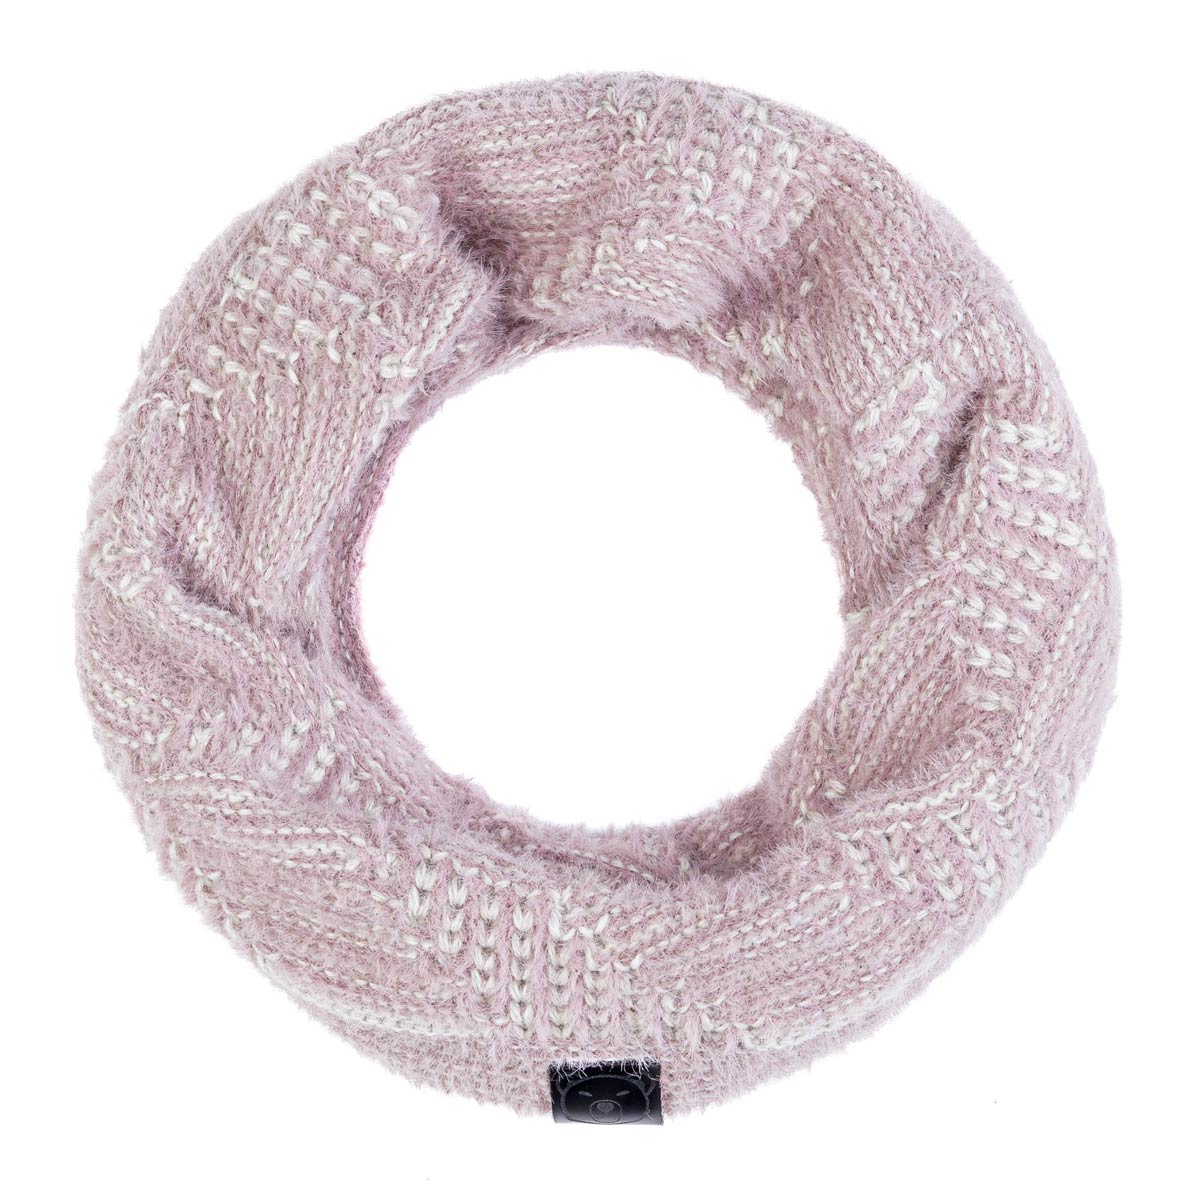 Snood-tricot-leger-vieux-rose--AT-06993_F12-1--